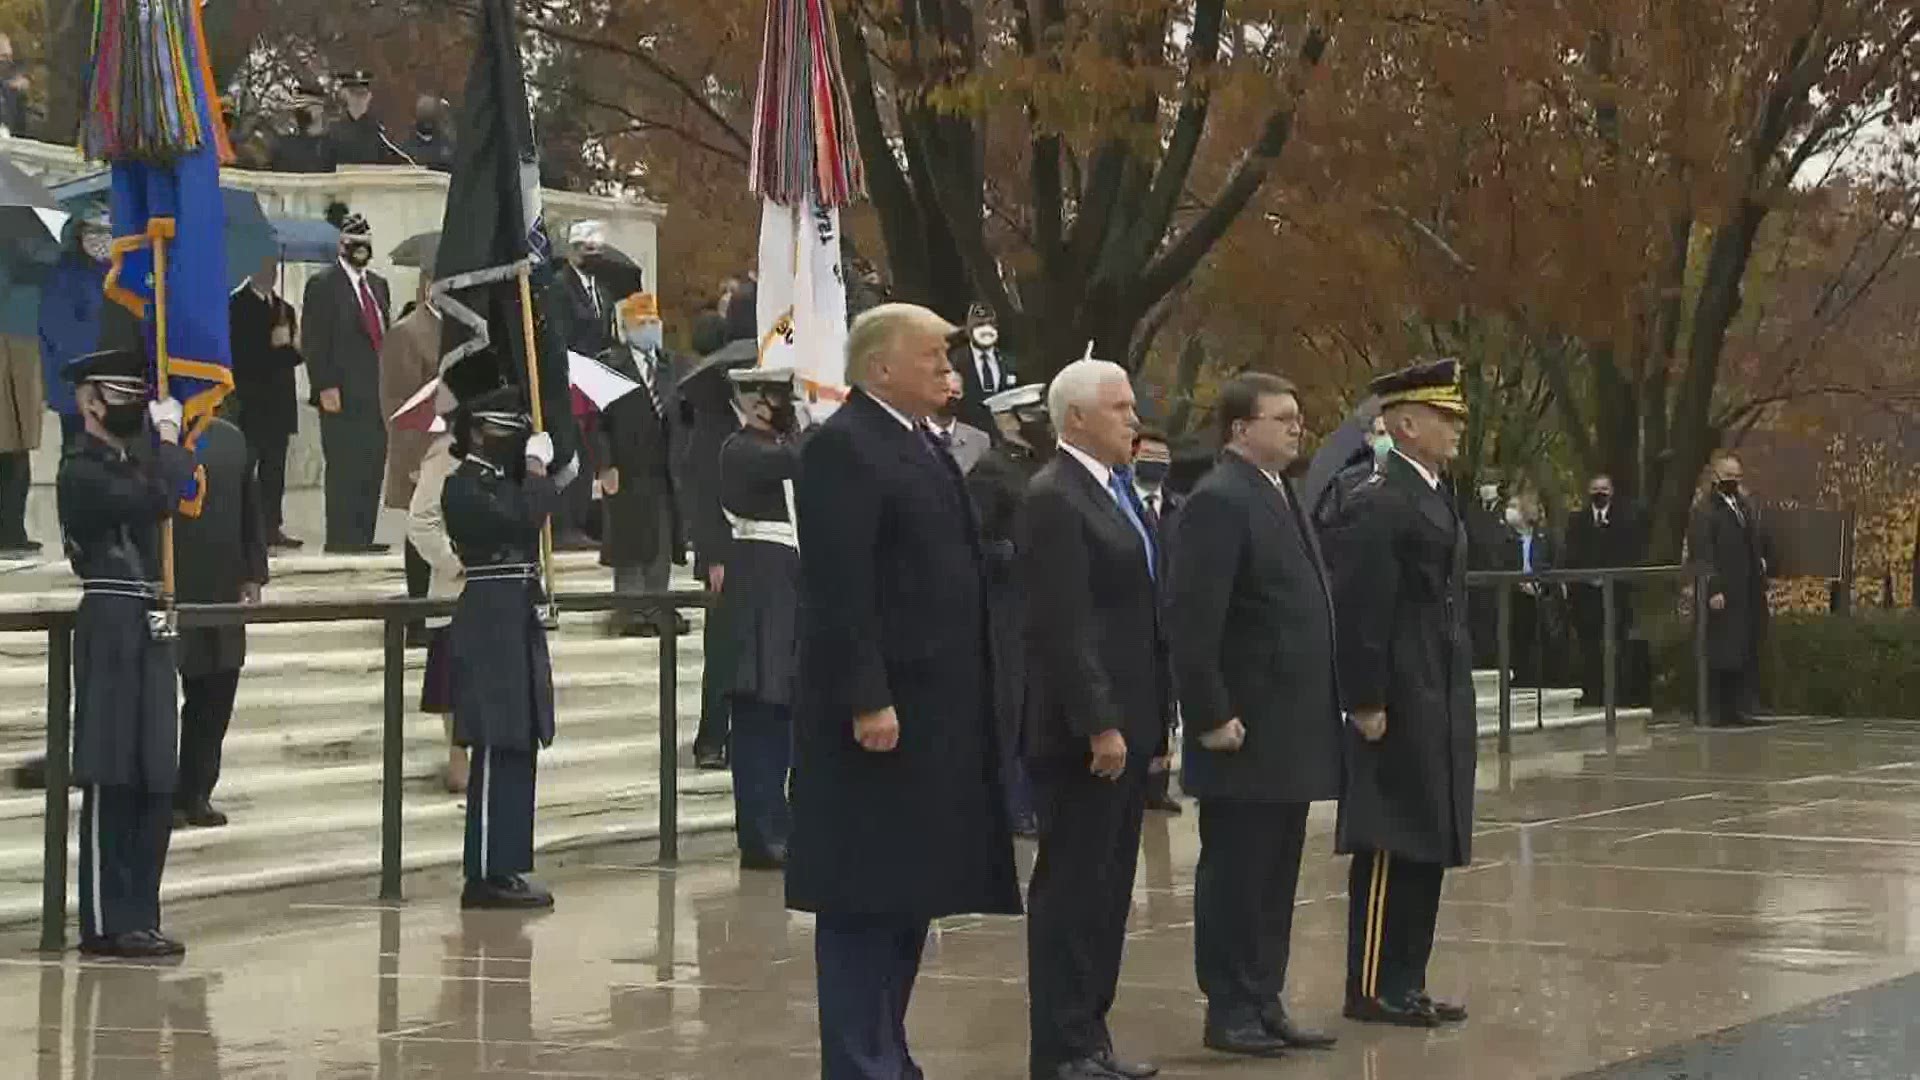 Wednesday President Trump attended a wreath laying ceremony at Arlington National Cemetery on Veteran's Day.